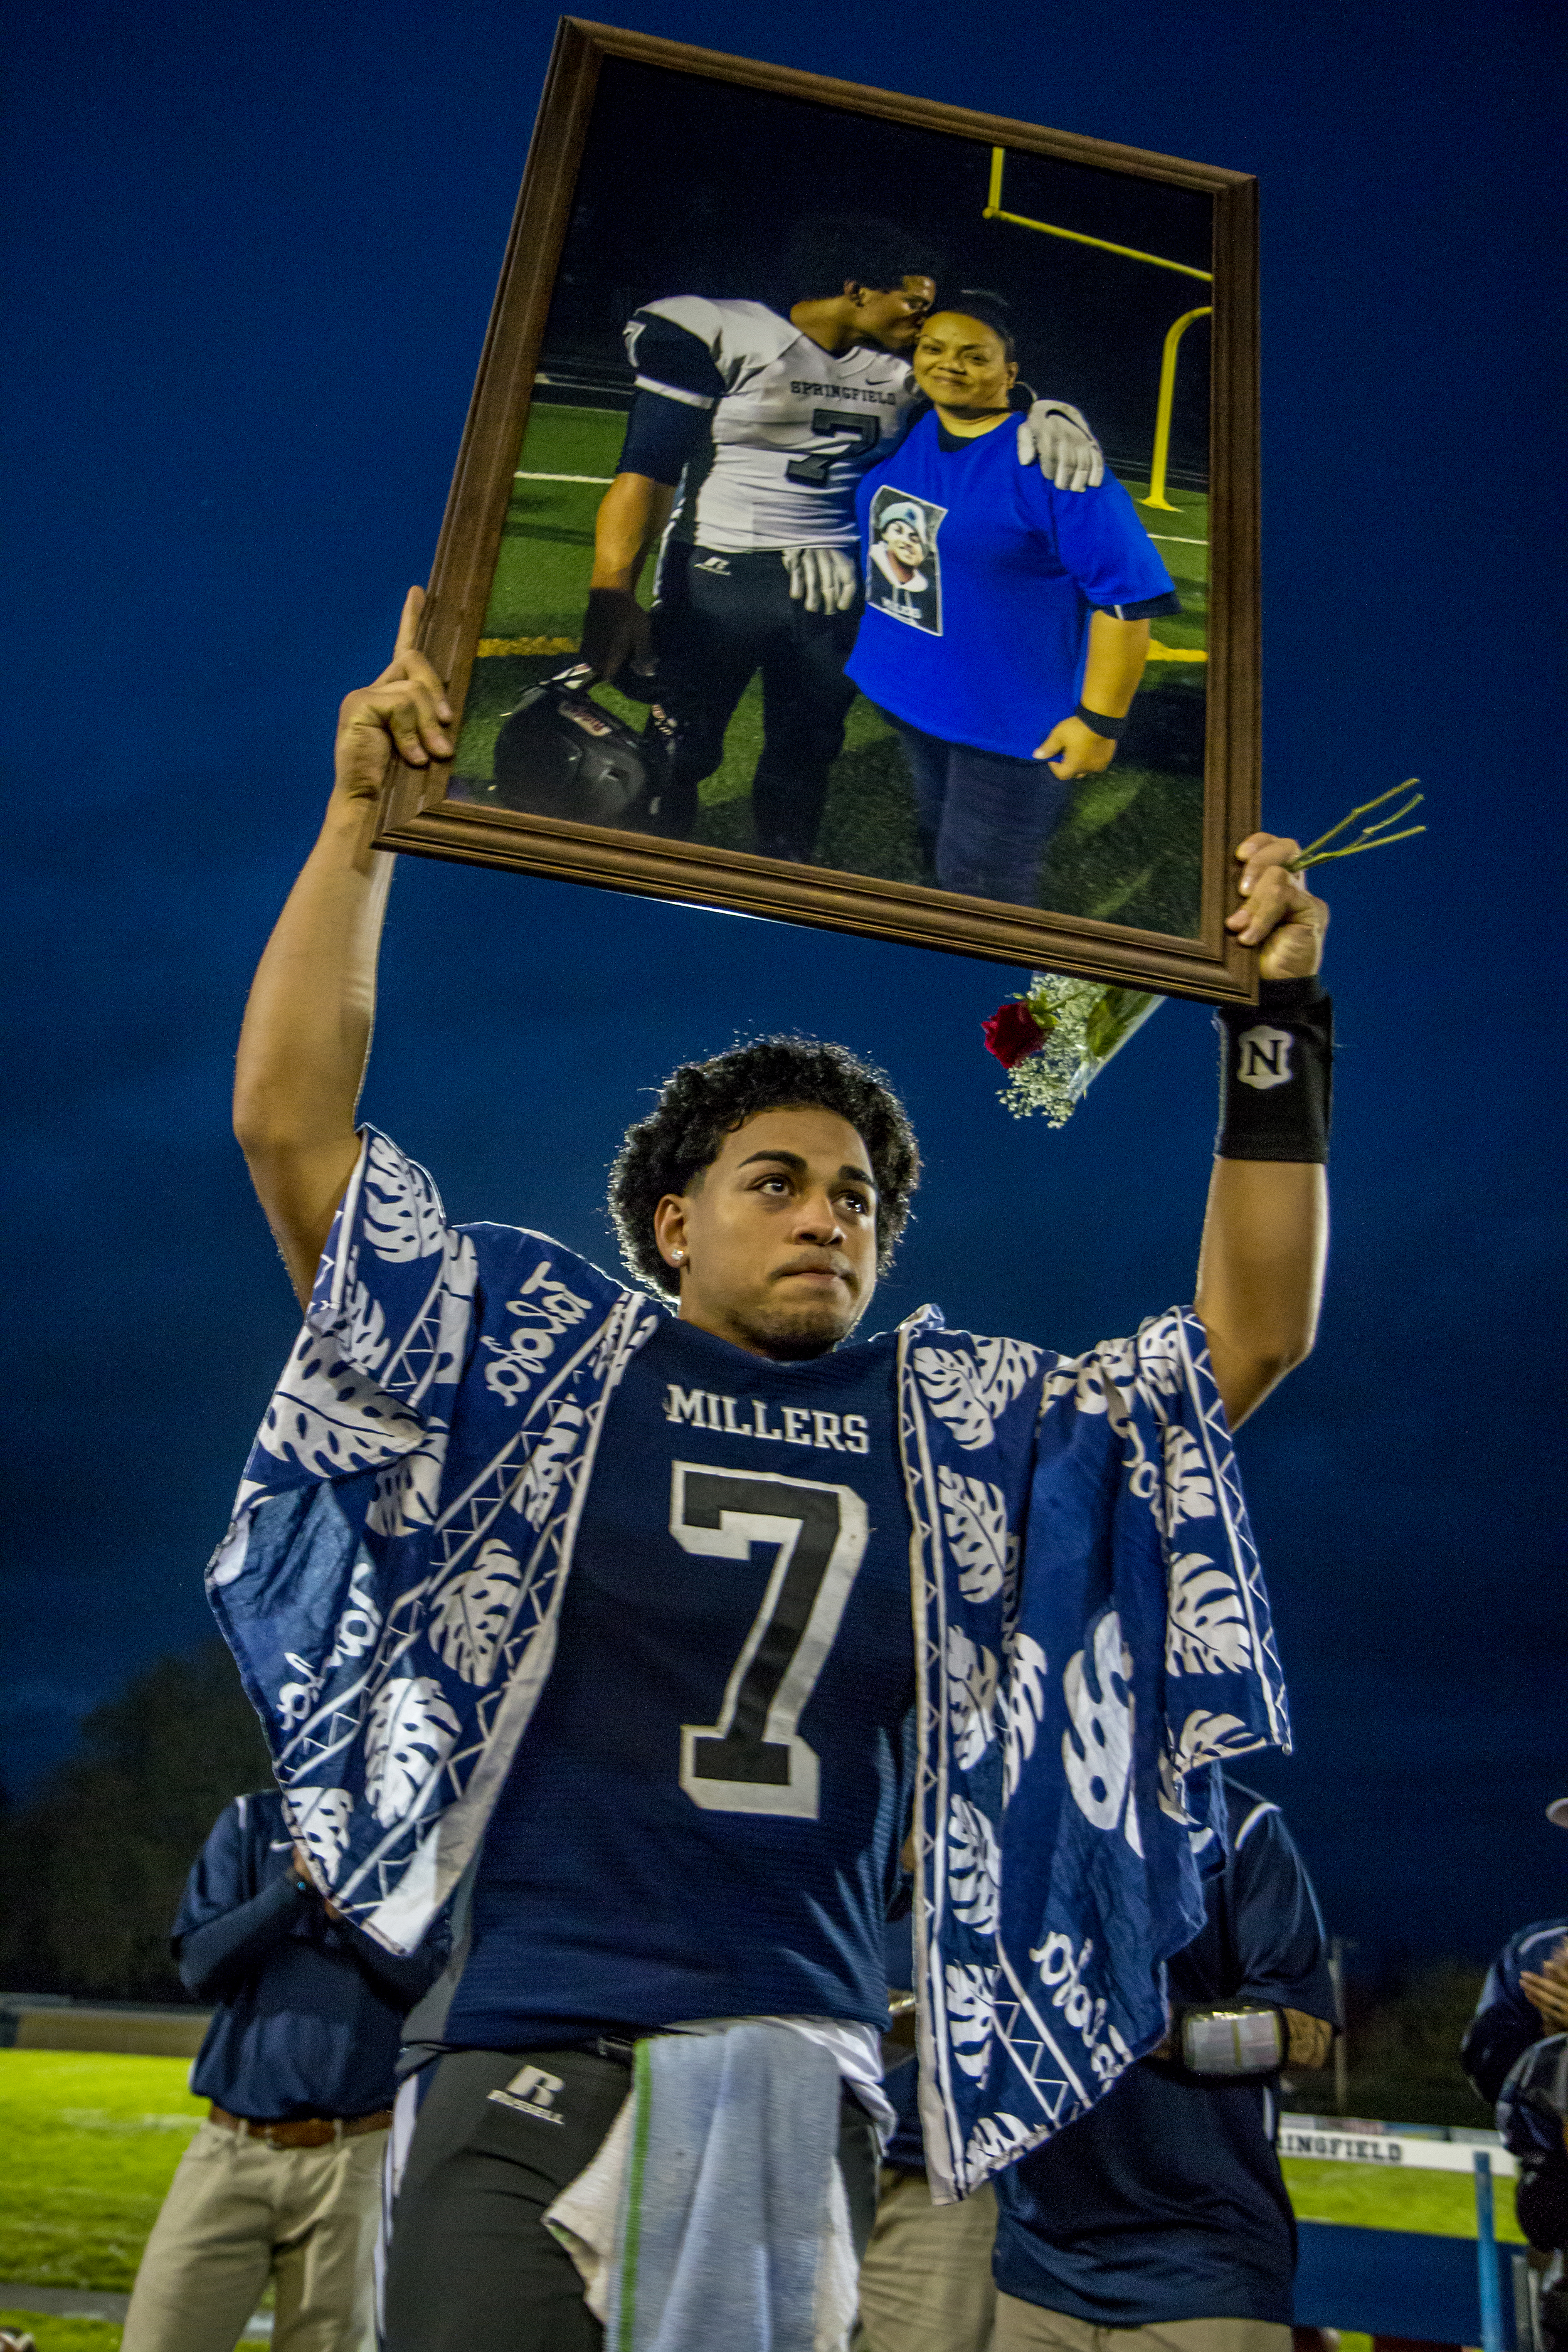  Nick Ah Sam holds up a picture of his mother Margie at a football game at Springfield High School. His mother past away just days before the game. Within the first few minutes of the game, Ah Sam would take off on a long run to make a touchdown, a f